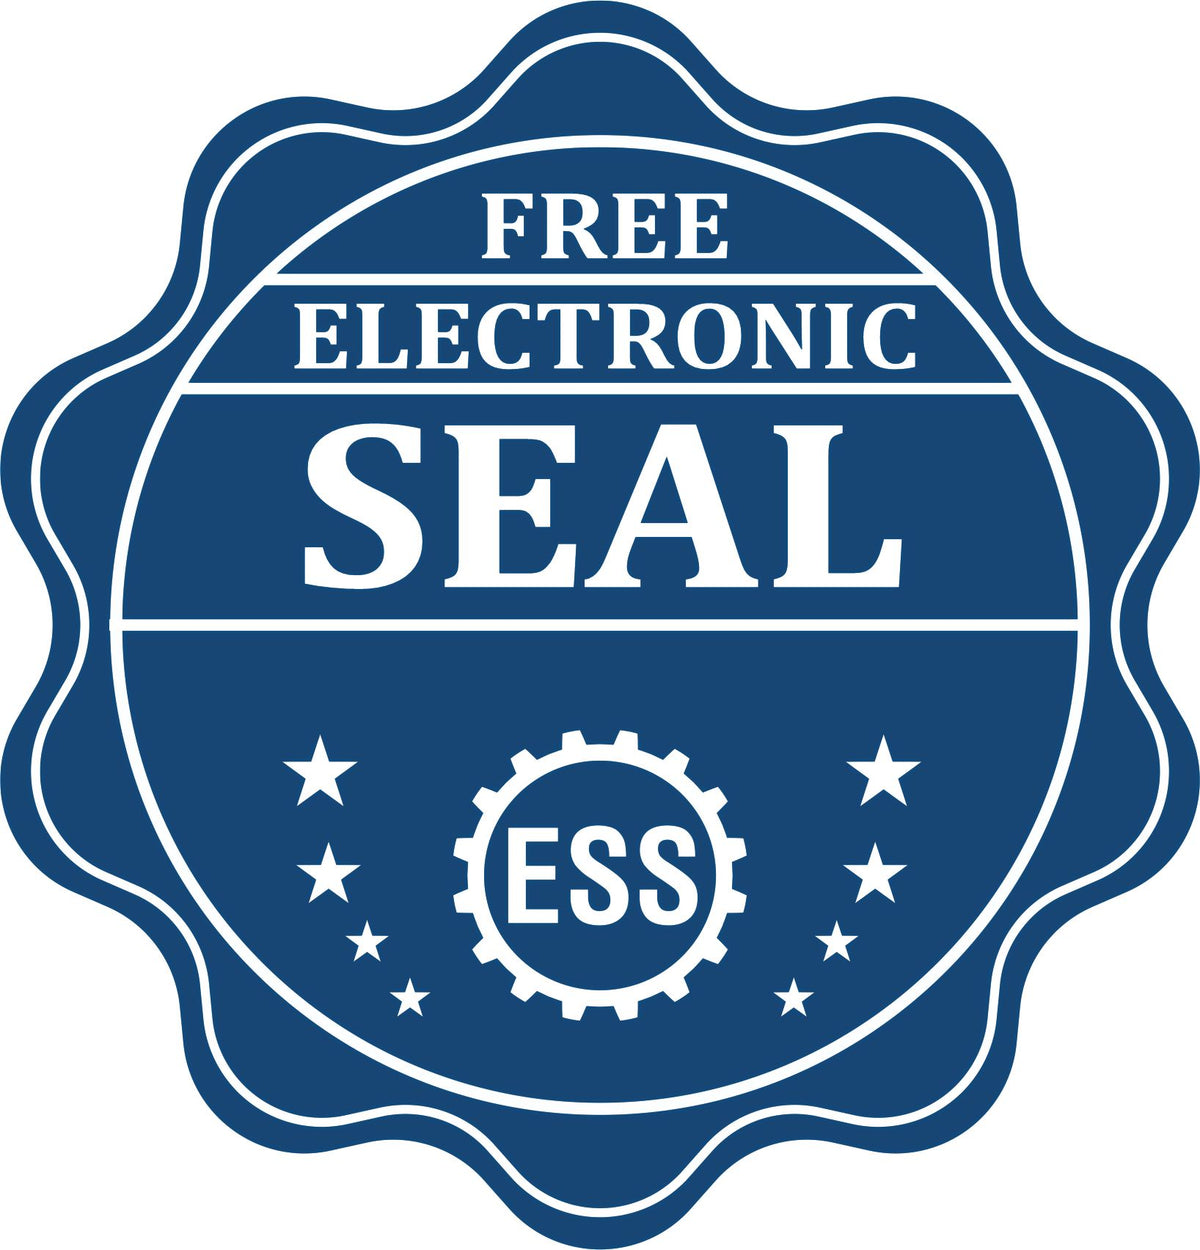 A badge showing a free electronic seal for the Hybrid Texas Land Surveyor Seal with stars and the ESS gear on the emblem.